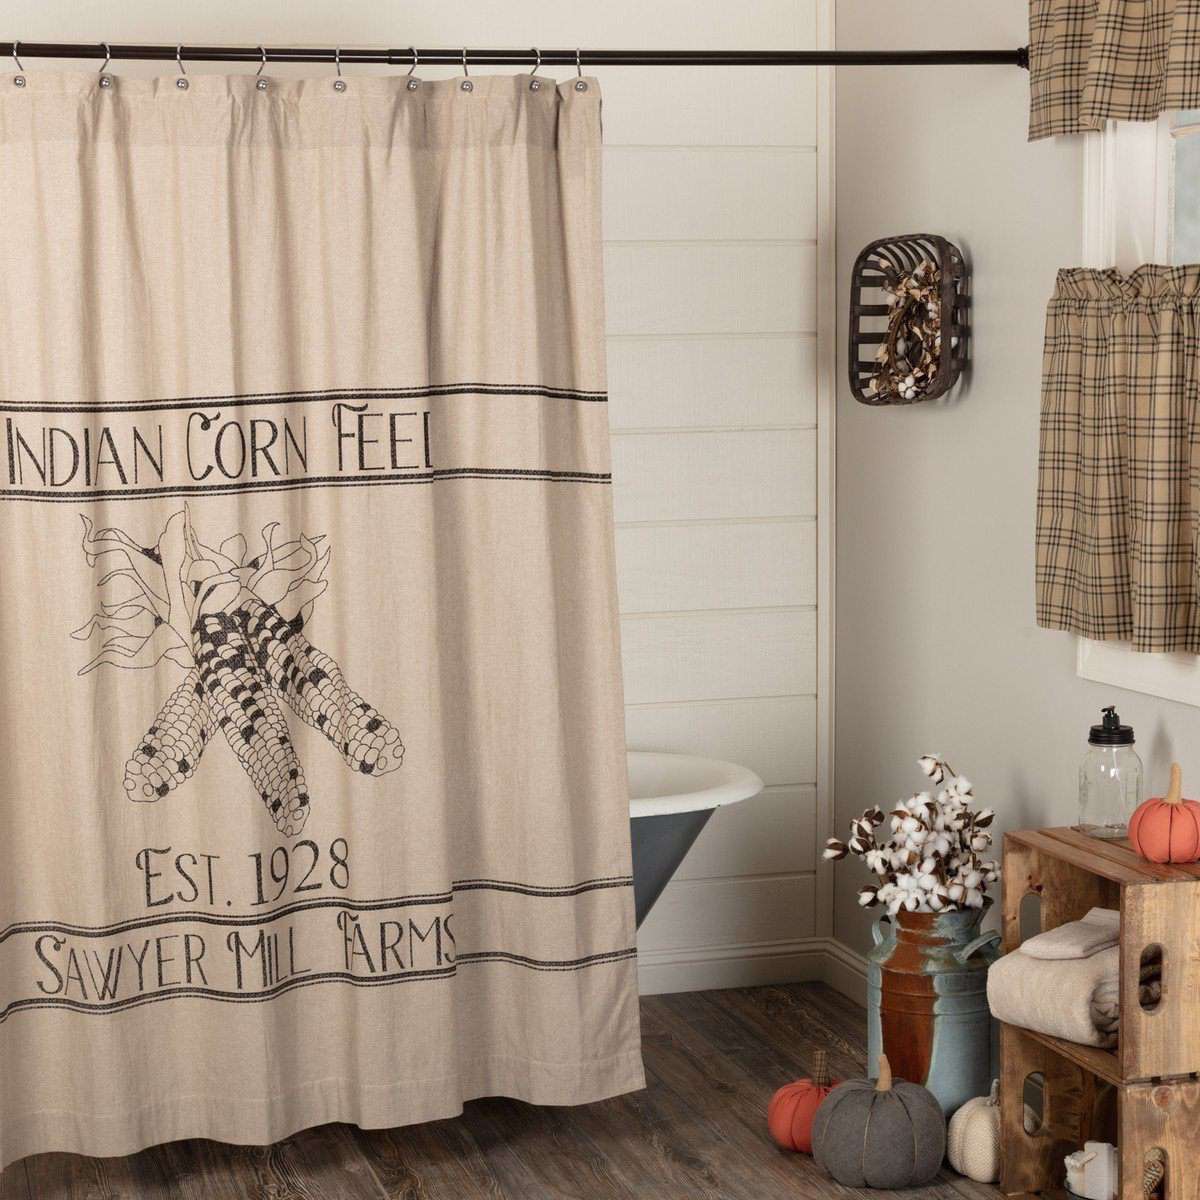 Sawyer Mill Charcoal Corn Feed Shower Curtain 72"x72" curtain VHC Brands 